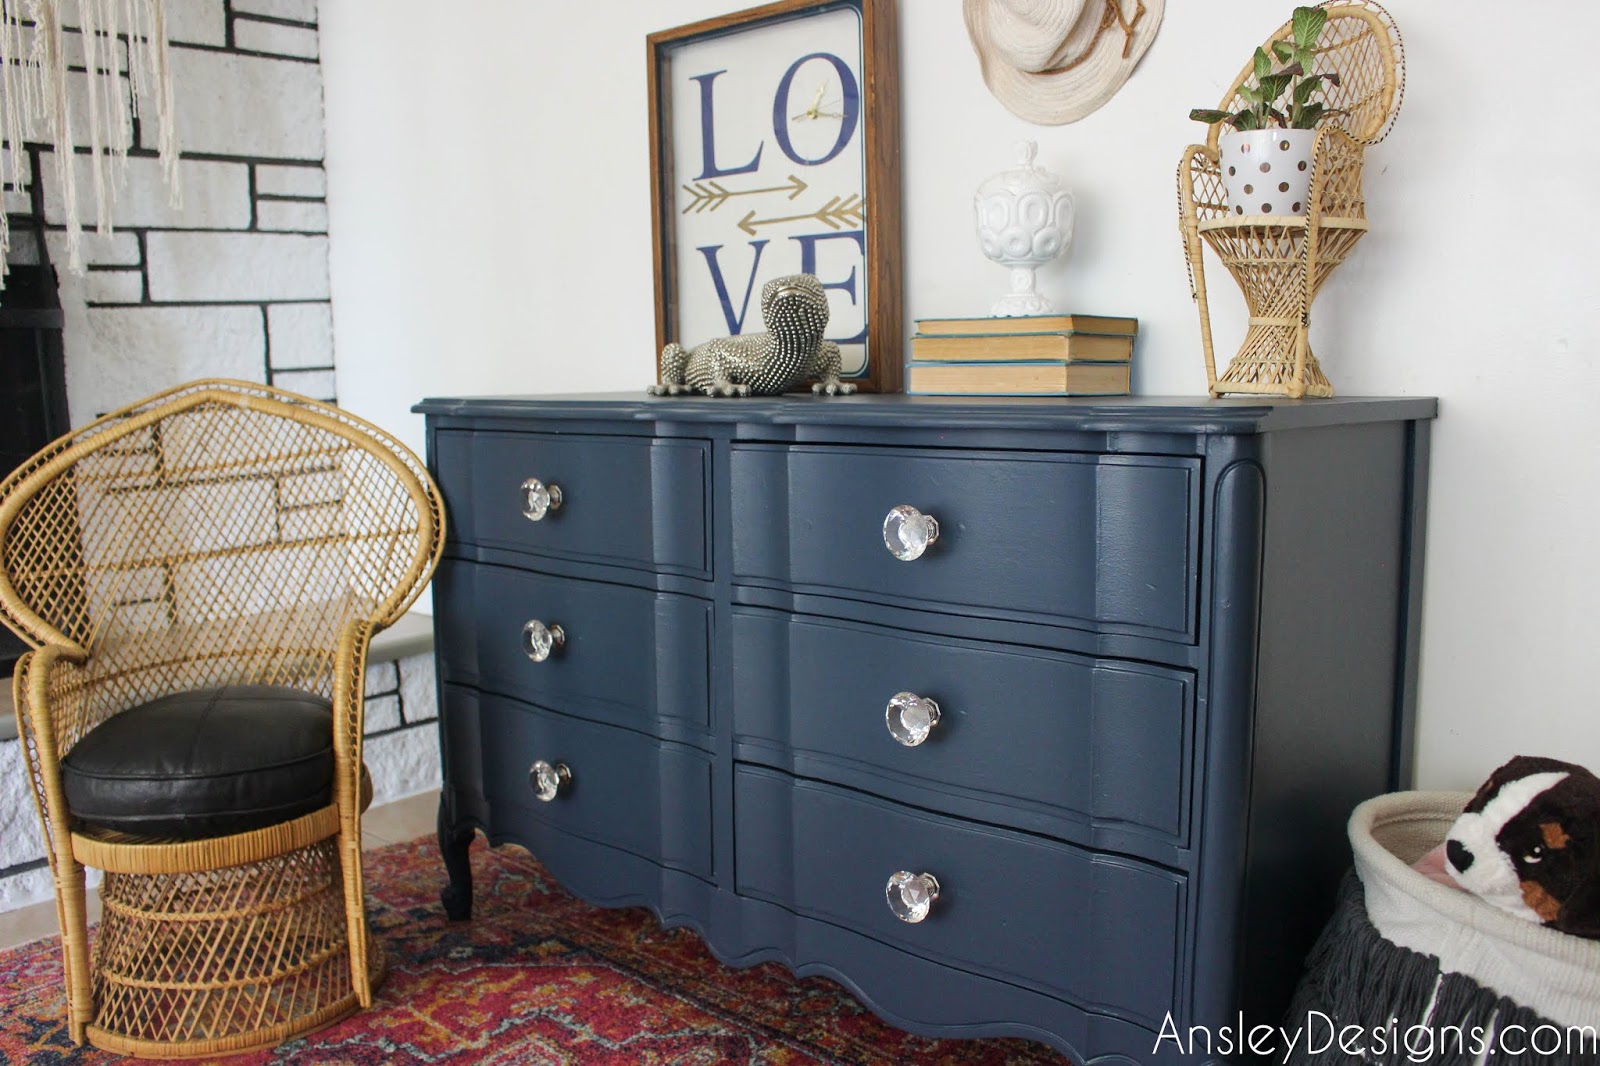 Ansley Designs Navy Blue French Provincial Dresser With Crystal Knobs